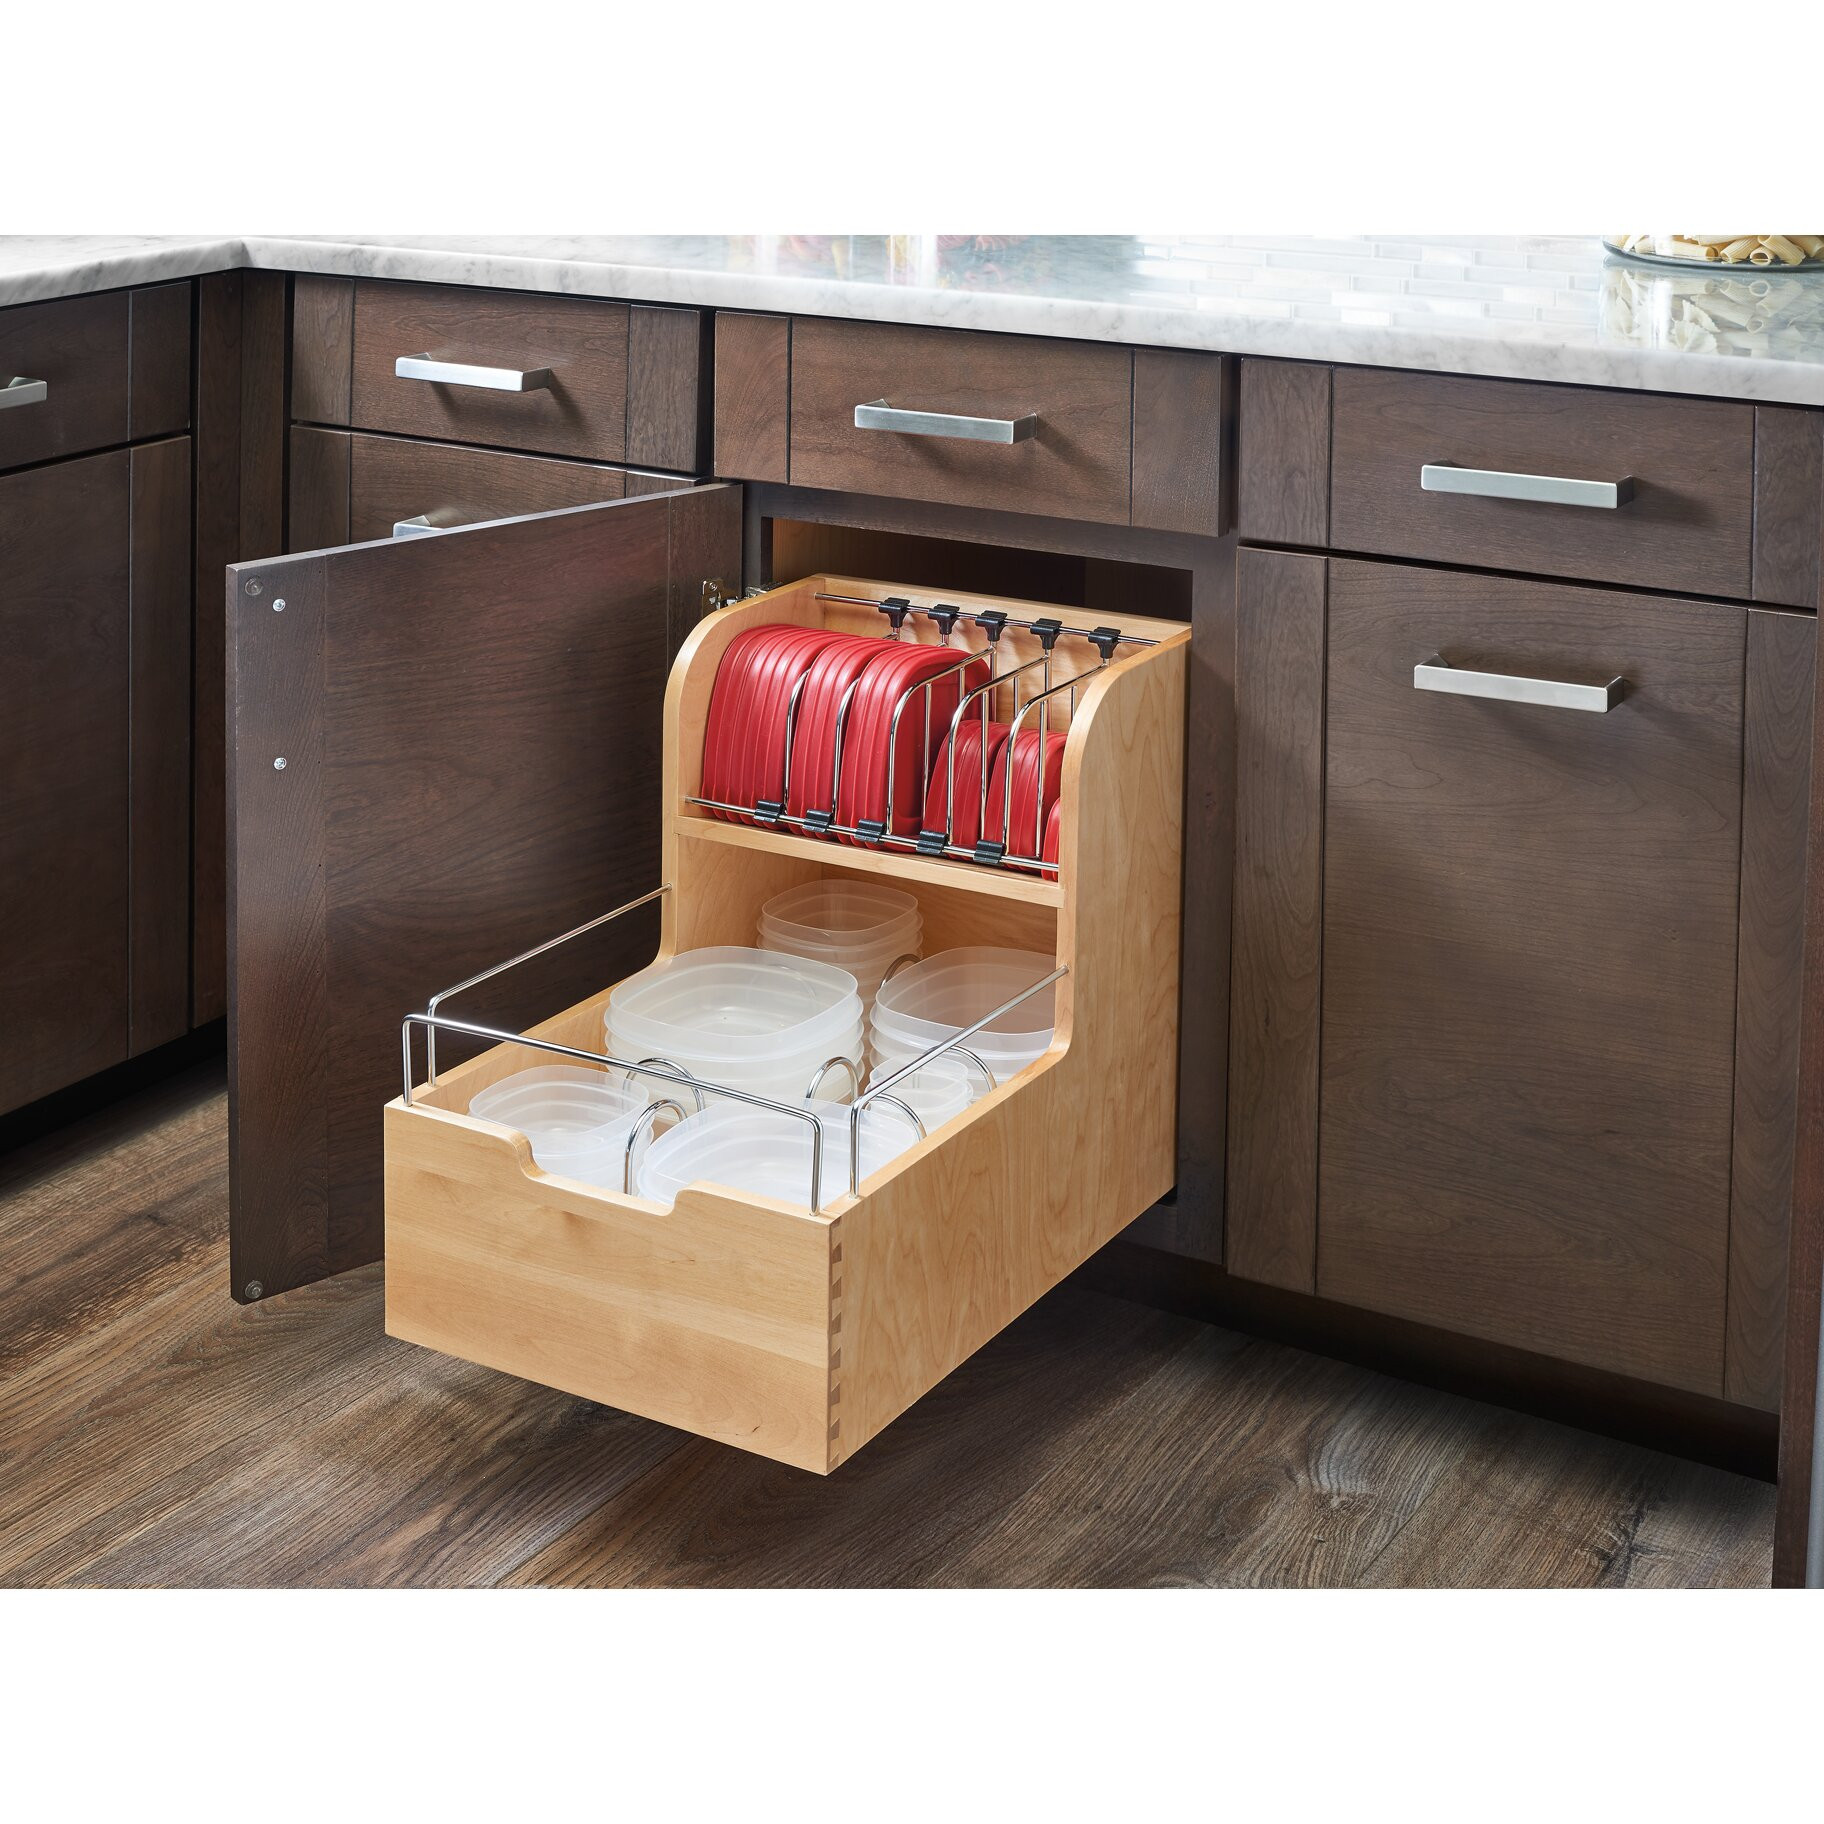 Container Store Kitchen Cabinet Organizer
 Rev A Shelf Wood Food Storage Container Organizer for Base